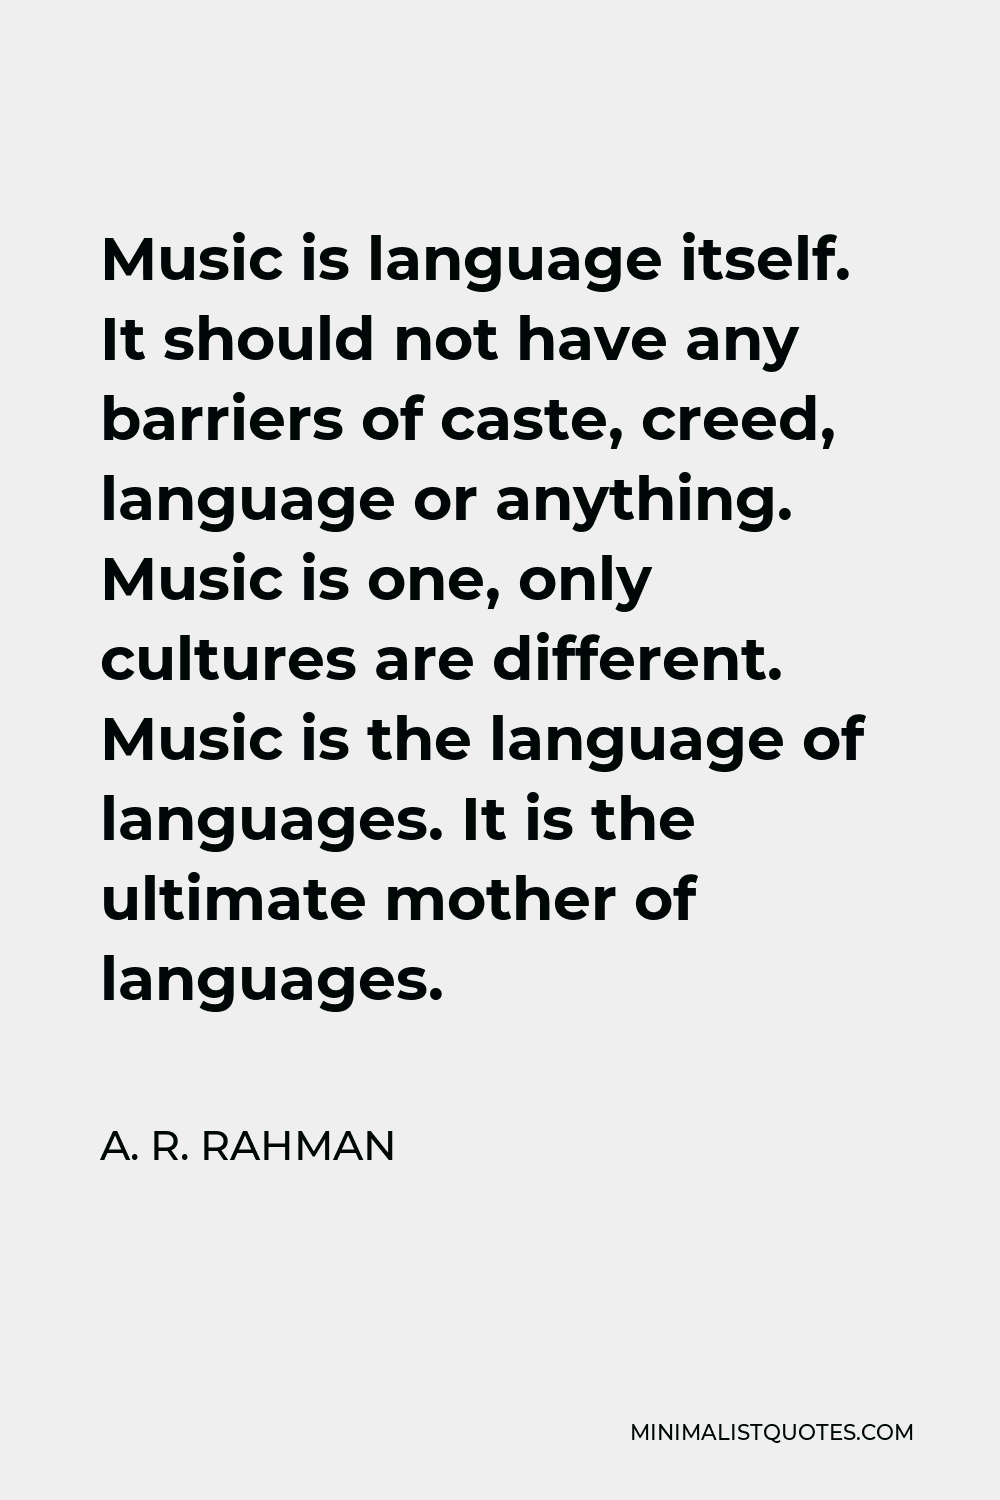 A. R. Rahman Quote - Music is language itself. It should not have any barriers of caste, creed, language or anything. Music is one, only cultures are different. Music is the language of languages. It is the ultimate mother of languages.